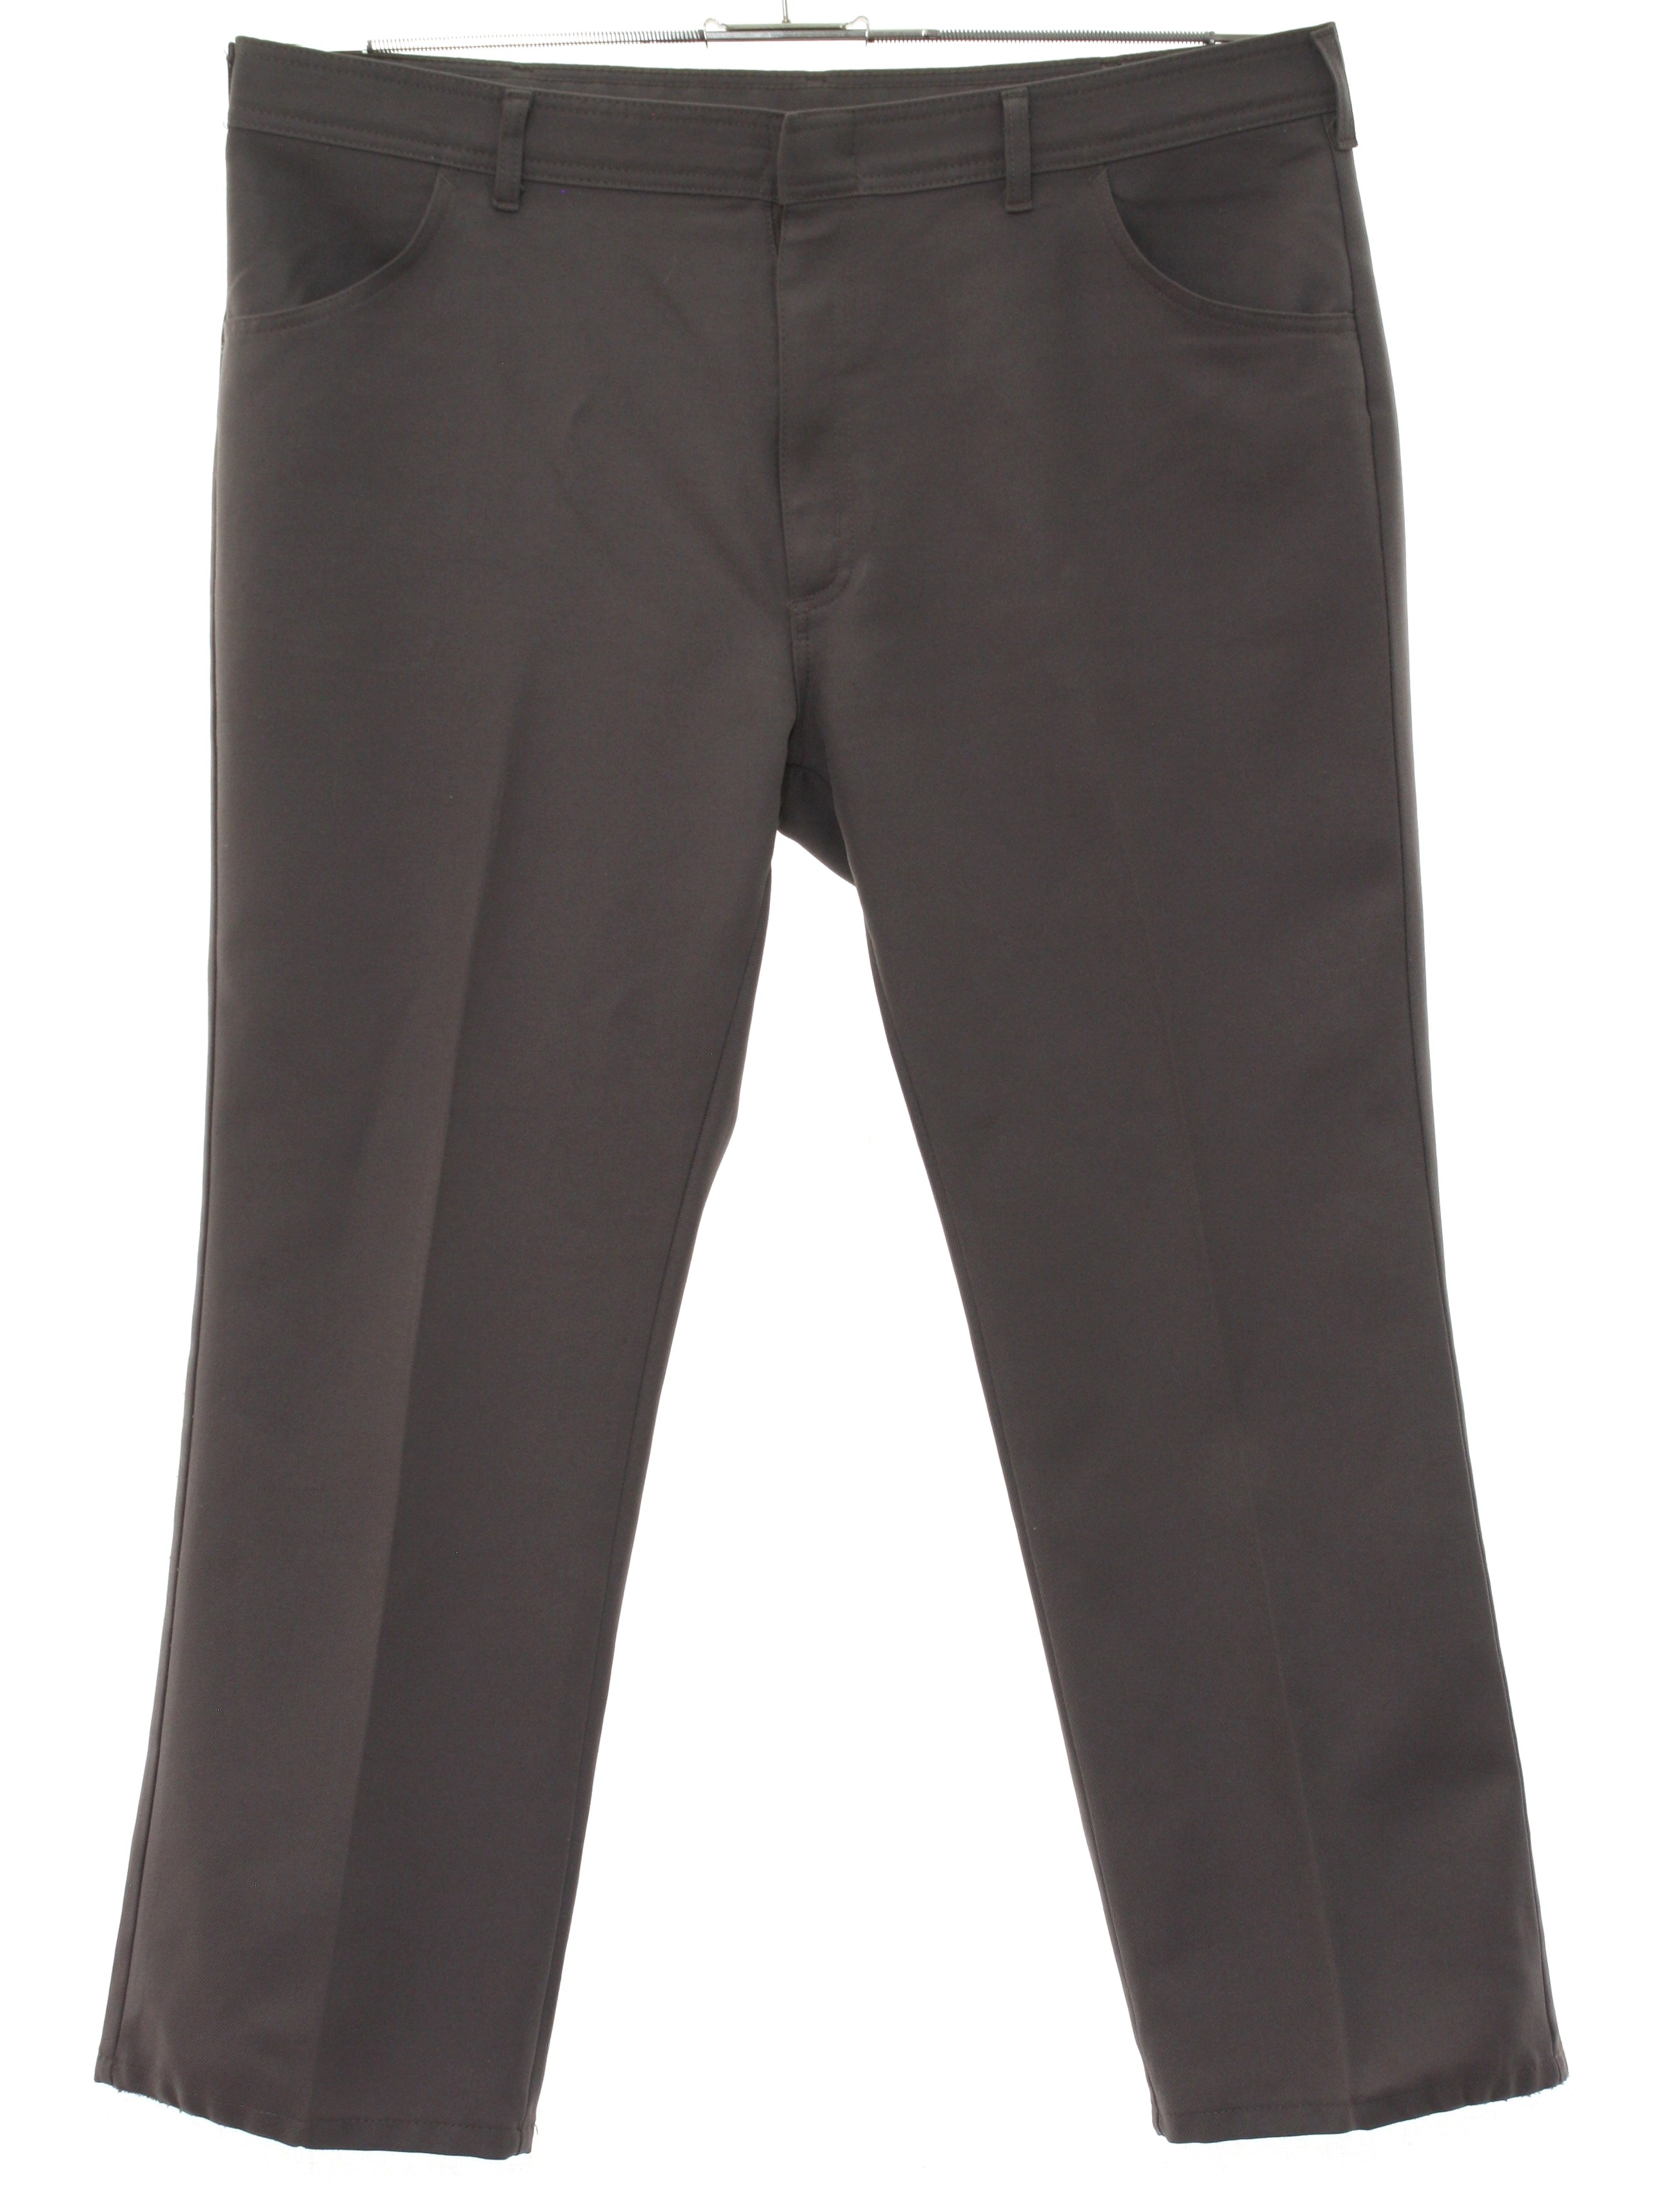 1980's Retro Pants: 80s -Sportabouts- Mens light coca brown solid